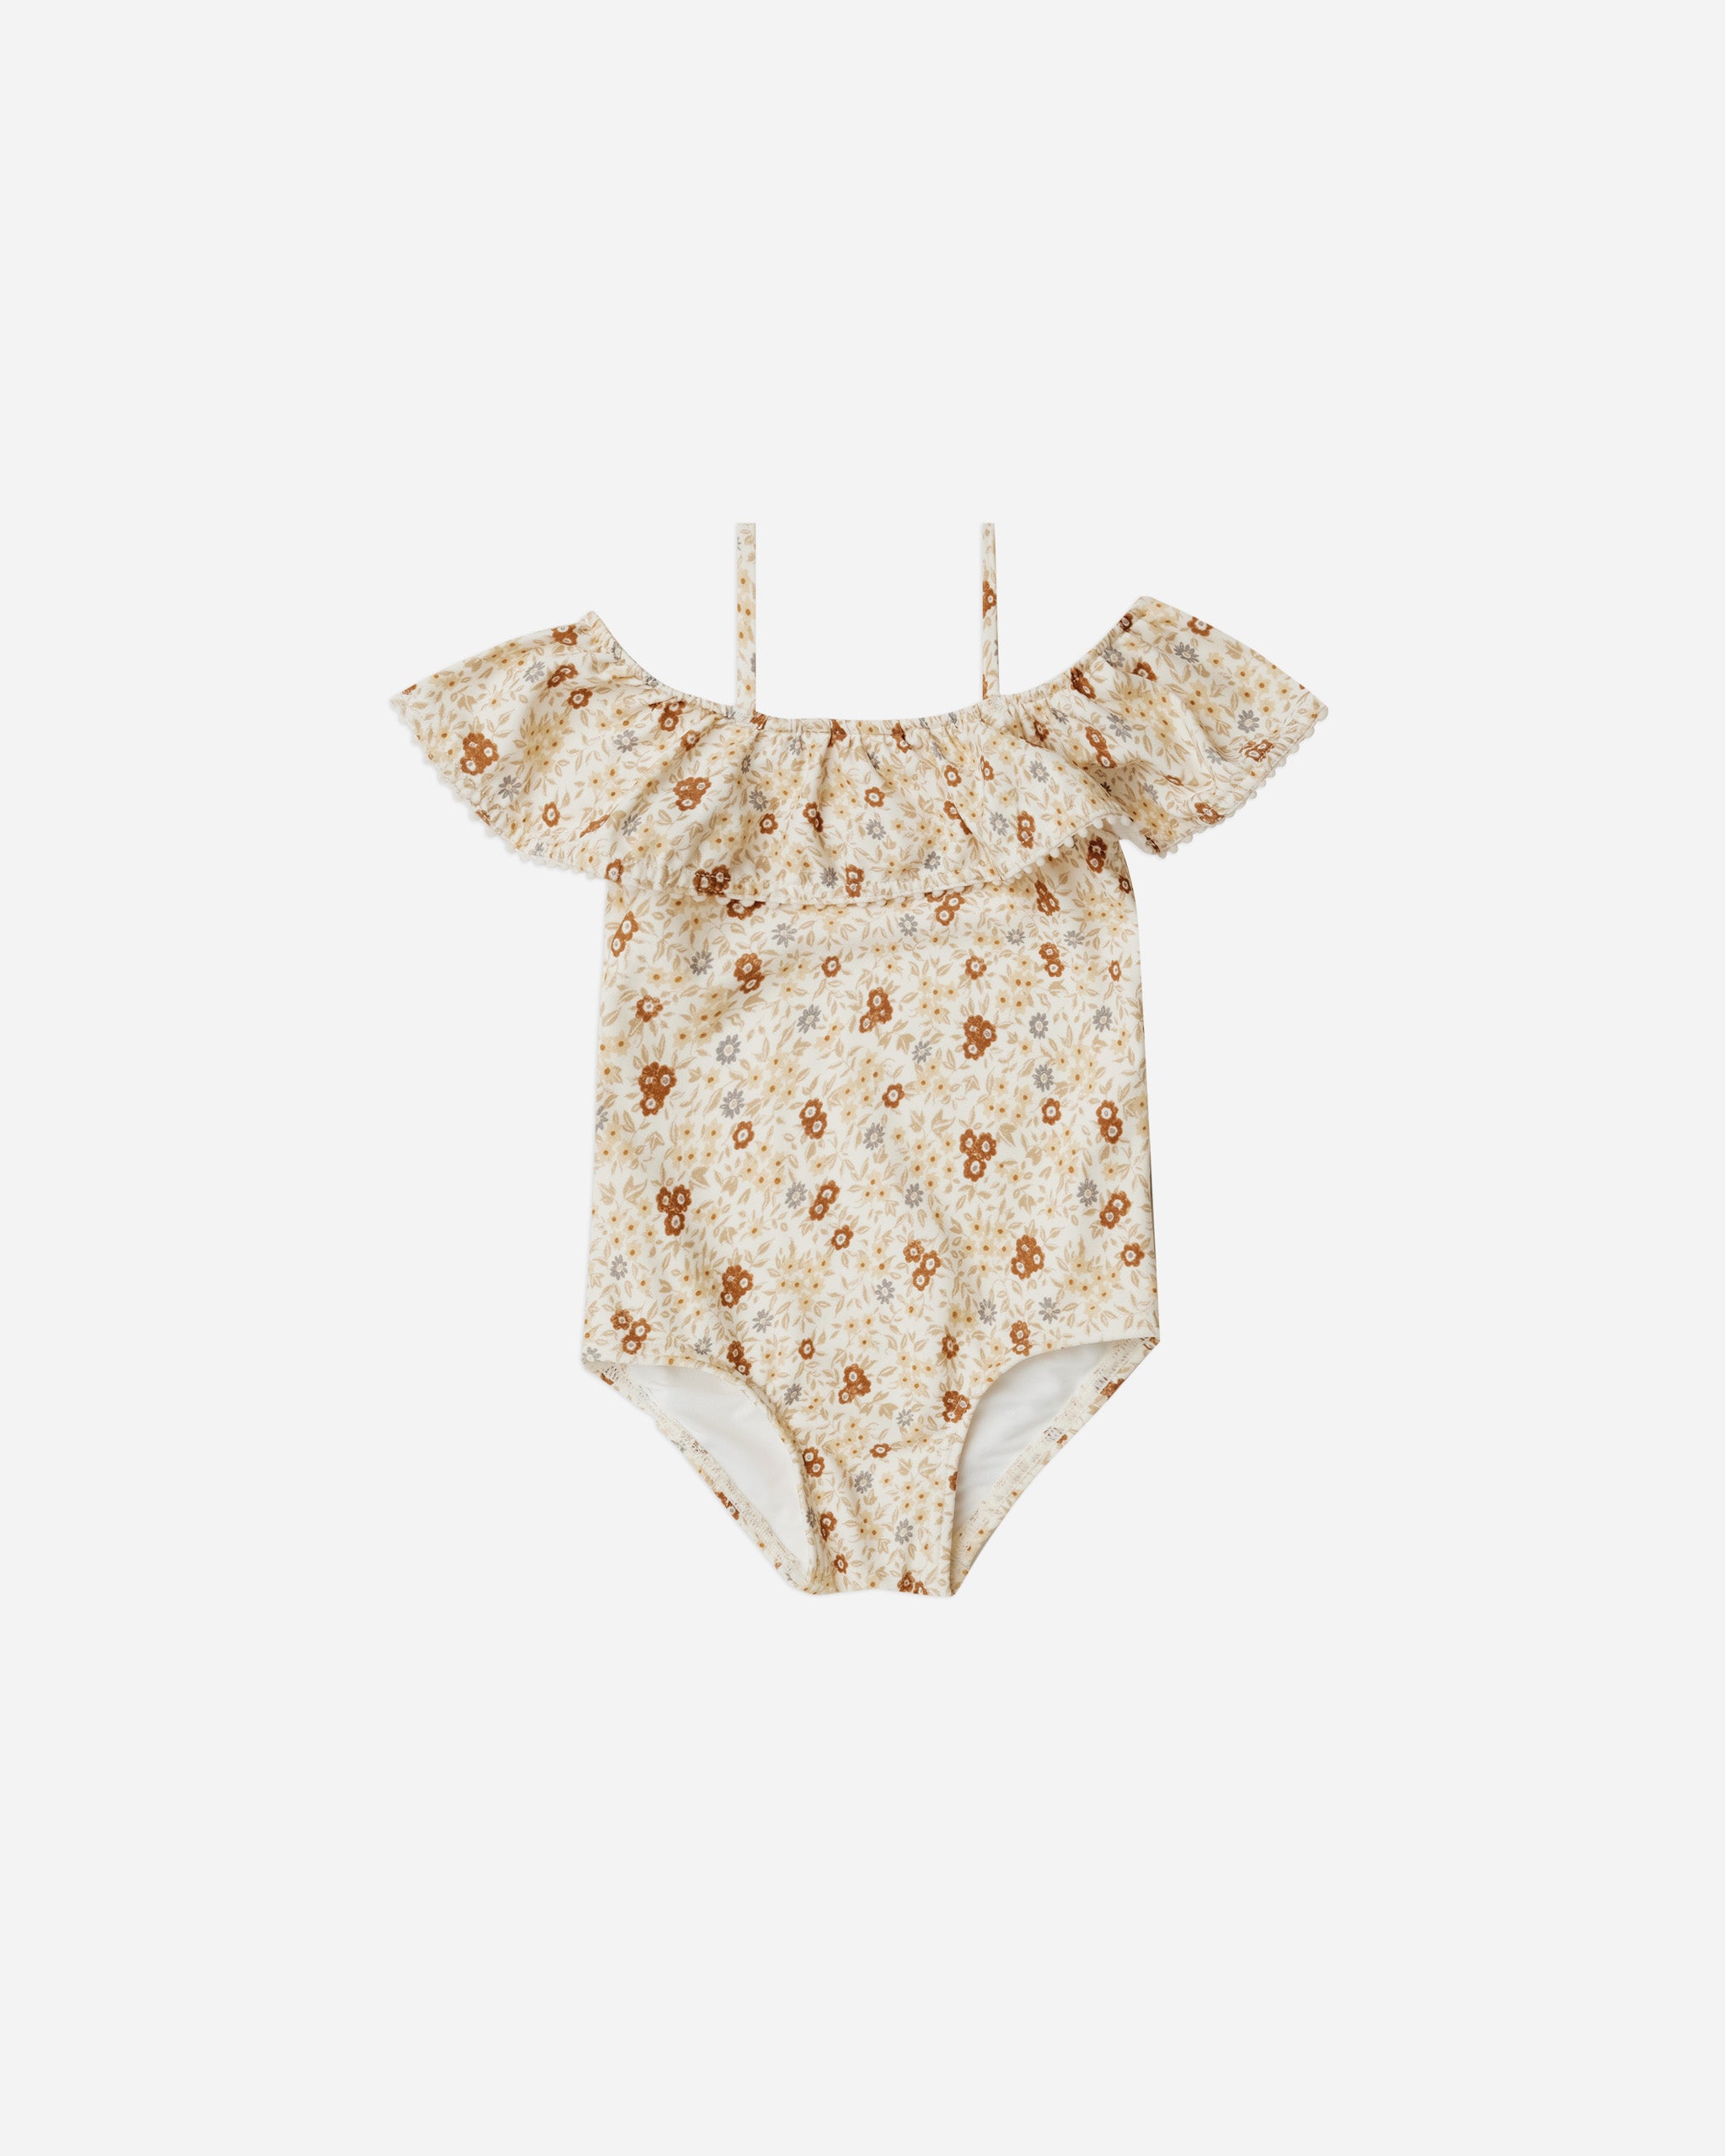 off-the-shoulder one-piece || flower field - Rylee + Cru | Kids Clothes | Trendy Baby Clothes | Modern Infant Outfits |